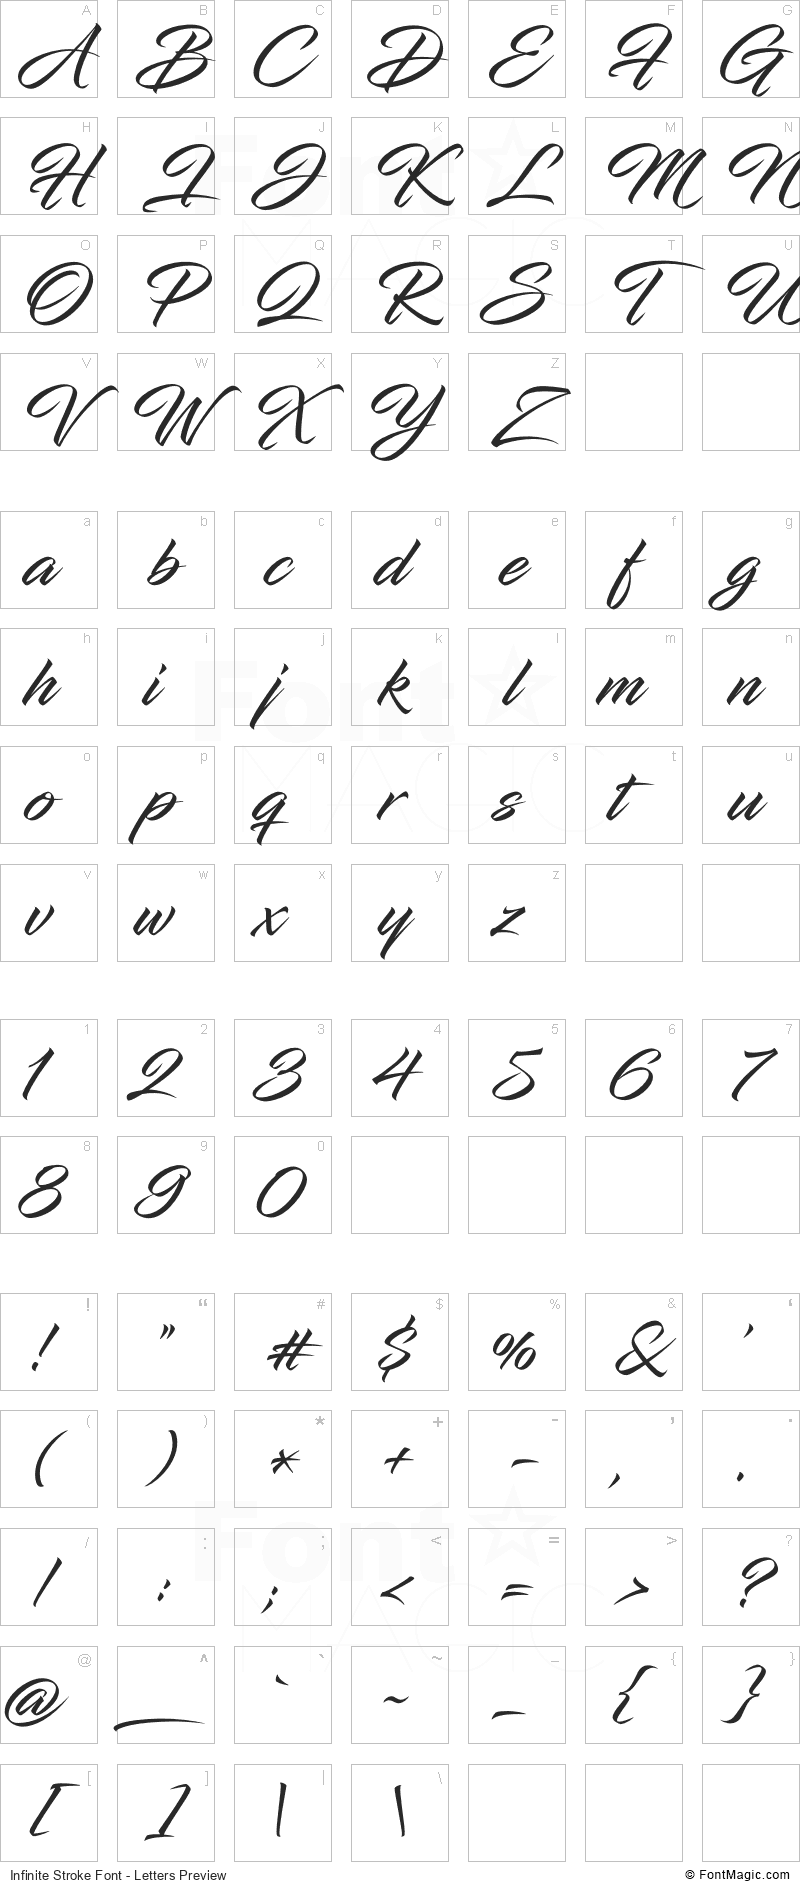 Infinite Stroke Font - All Latters Preview Chart